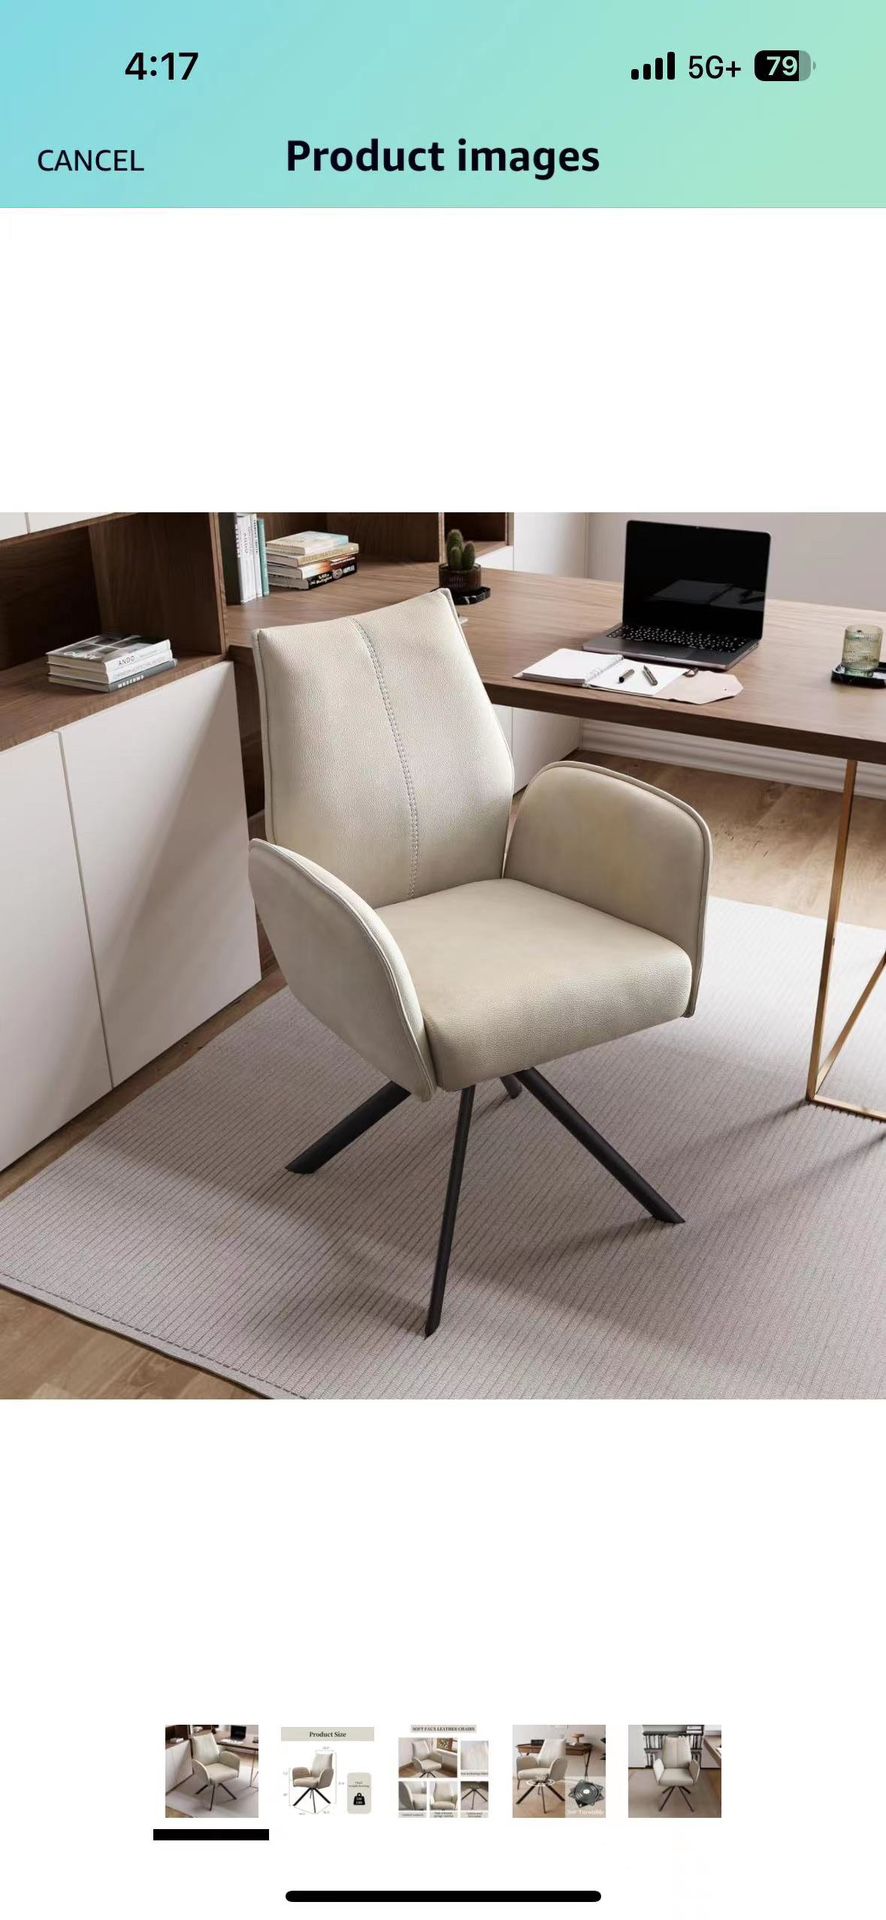 Modern Desk Chair no Wheel, Ergonomic Office Chair Home Office Upholstered Chair, Arm Chairs with Metal Legs, Computer Chair for Bedroom, Reception Ro